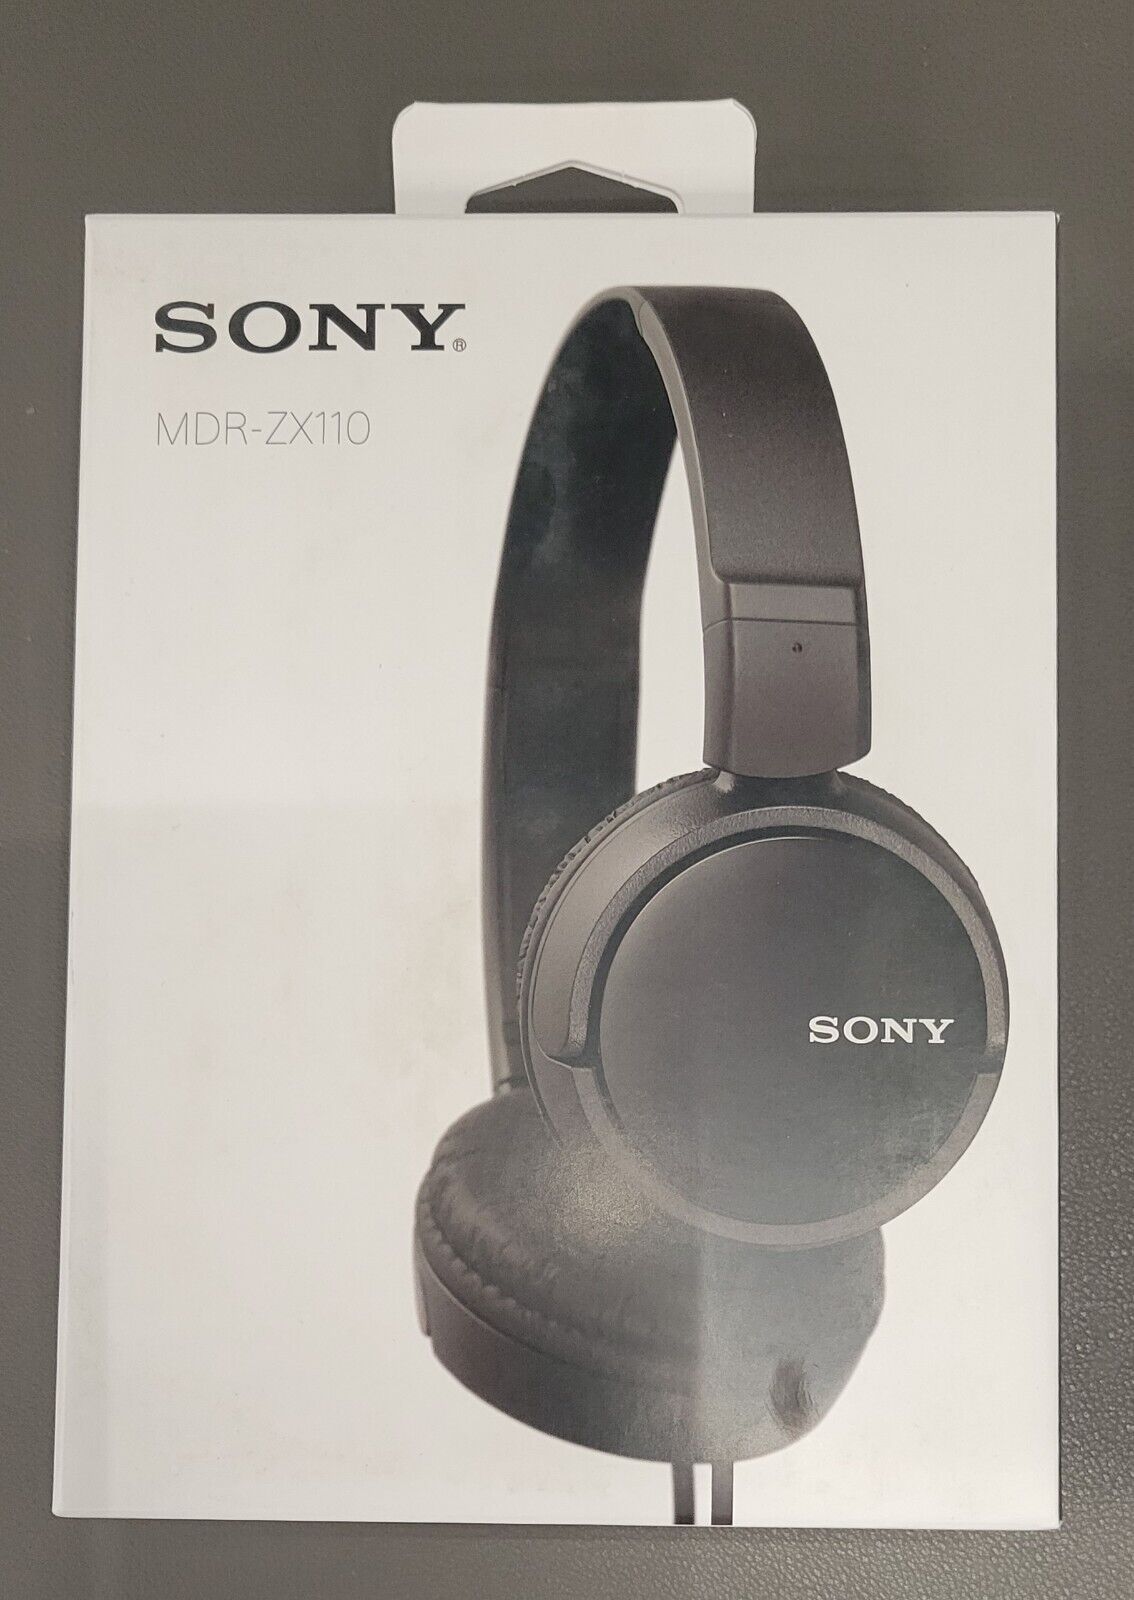 Sony MDRZX110 Portable Monitor Headphones - Black Brand New Ships Fast